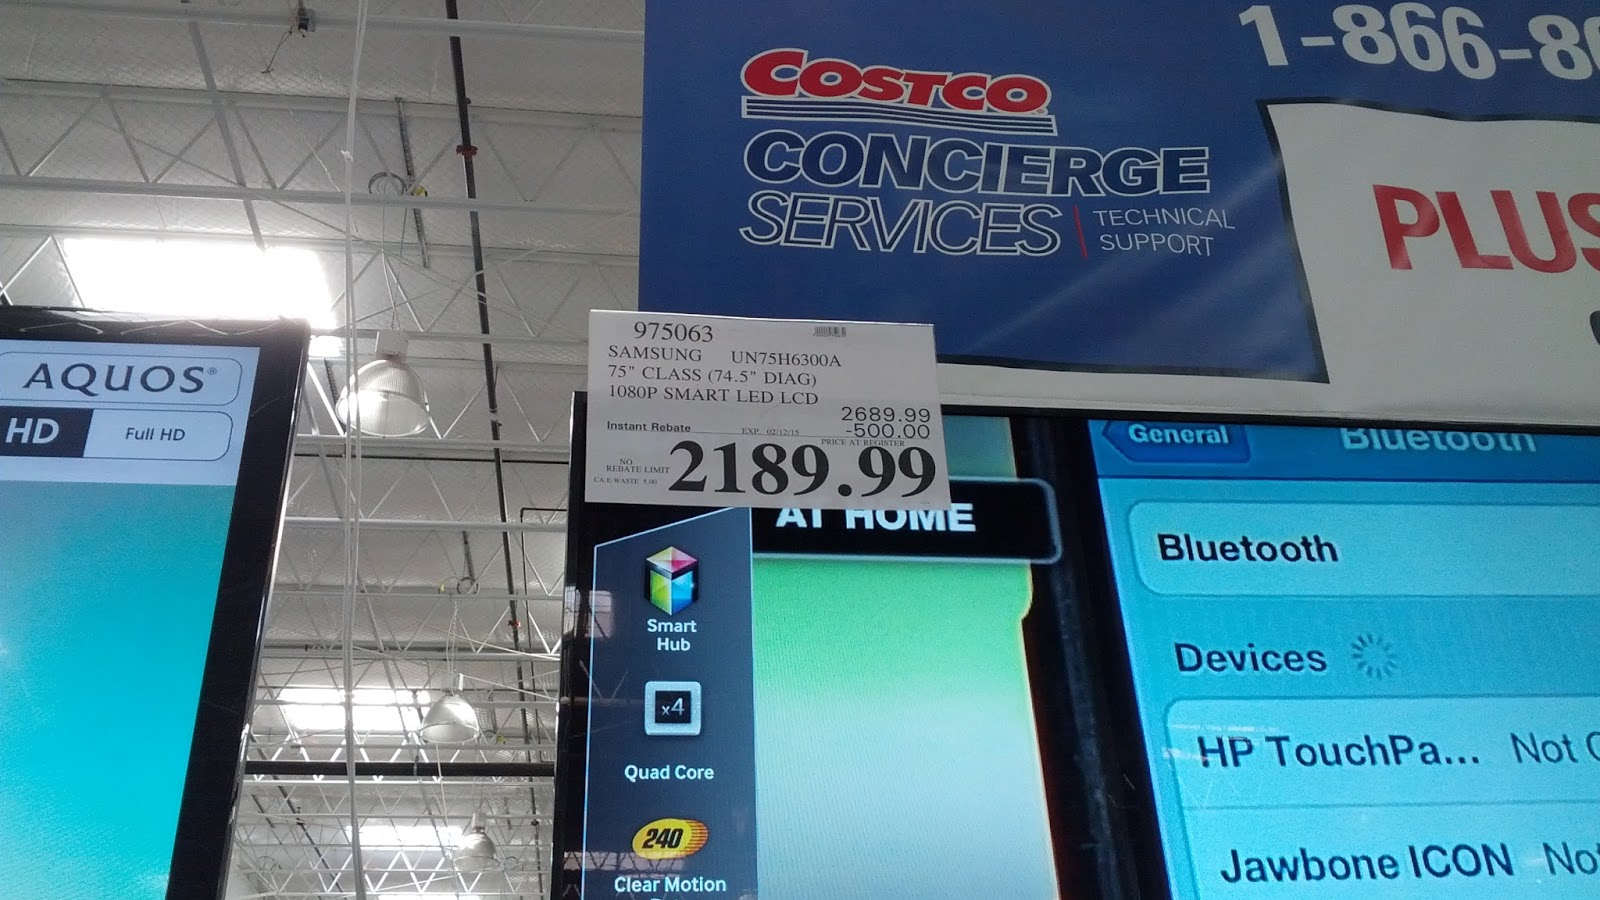 samsung-un75h6300a-75-led-lcd-hdtv-costco-weekender